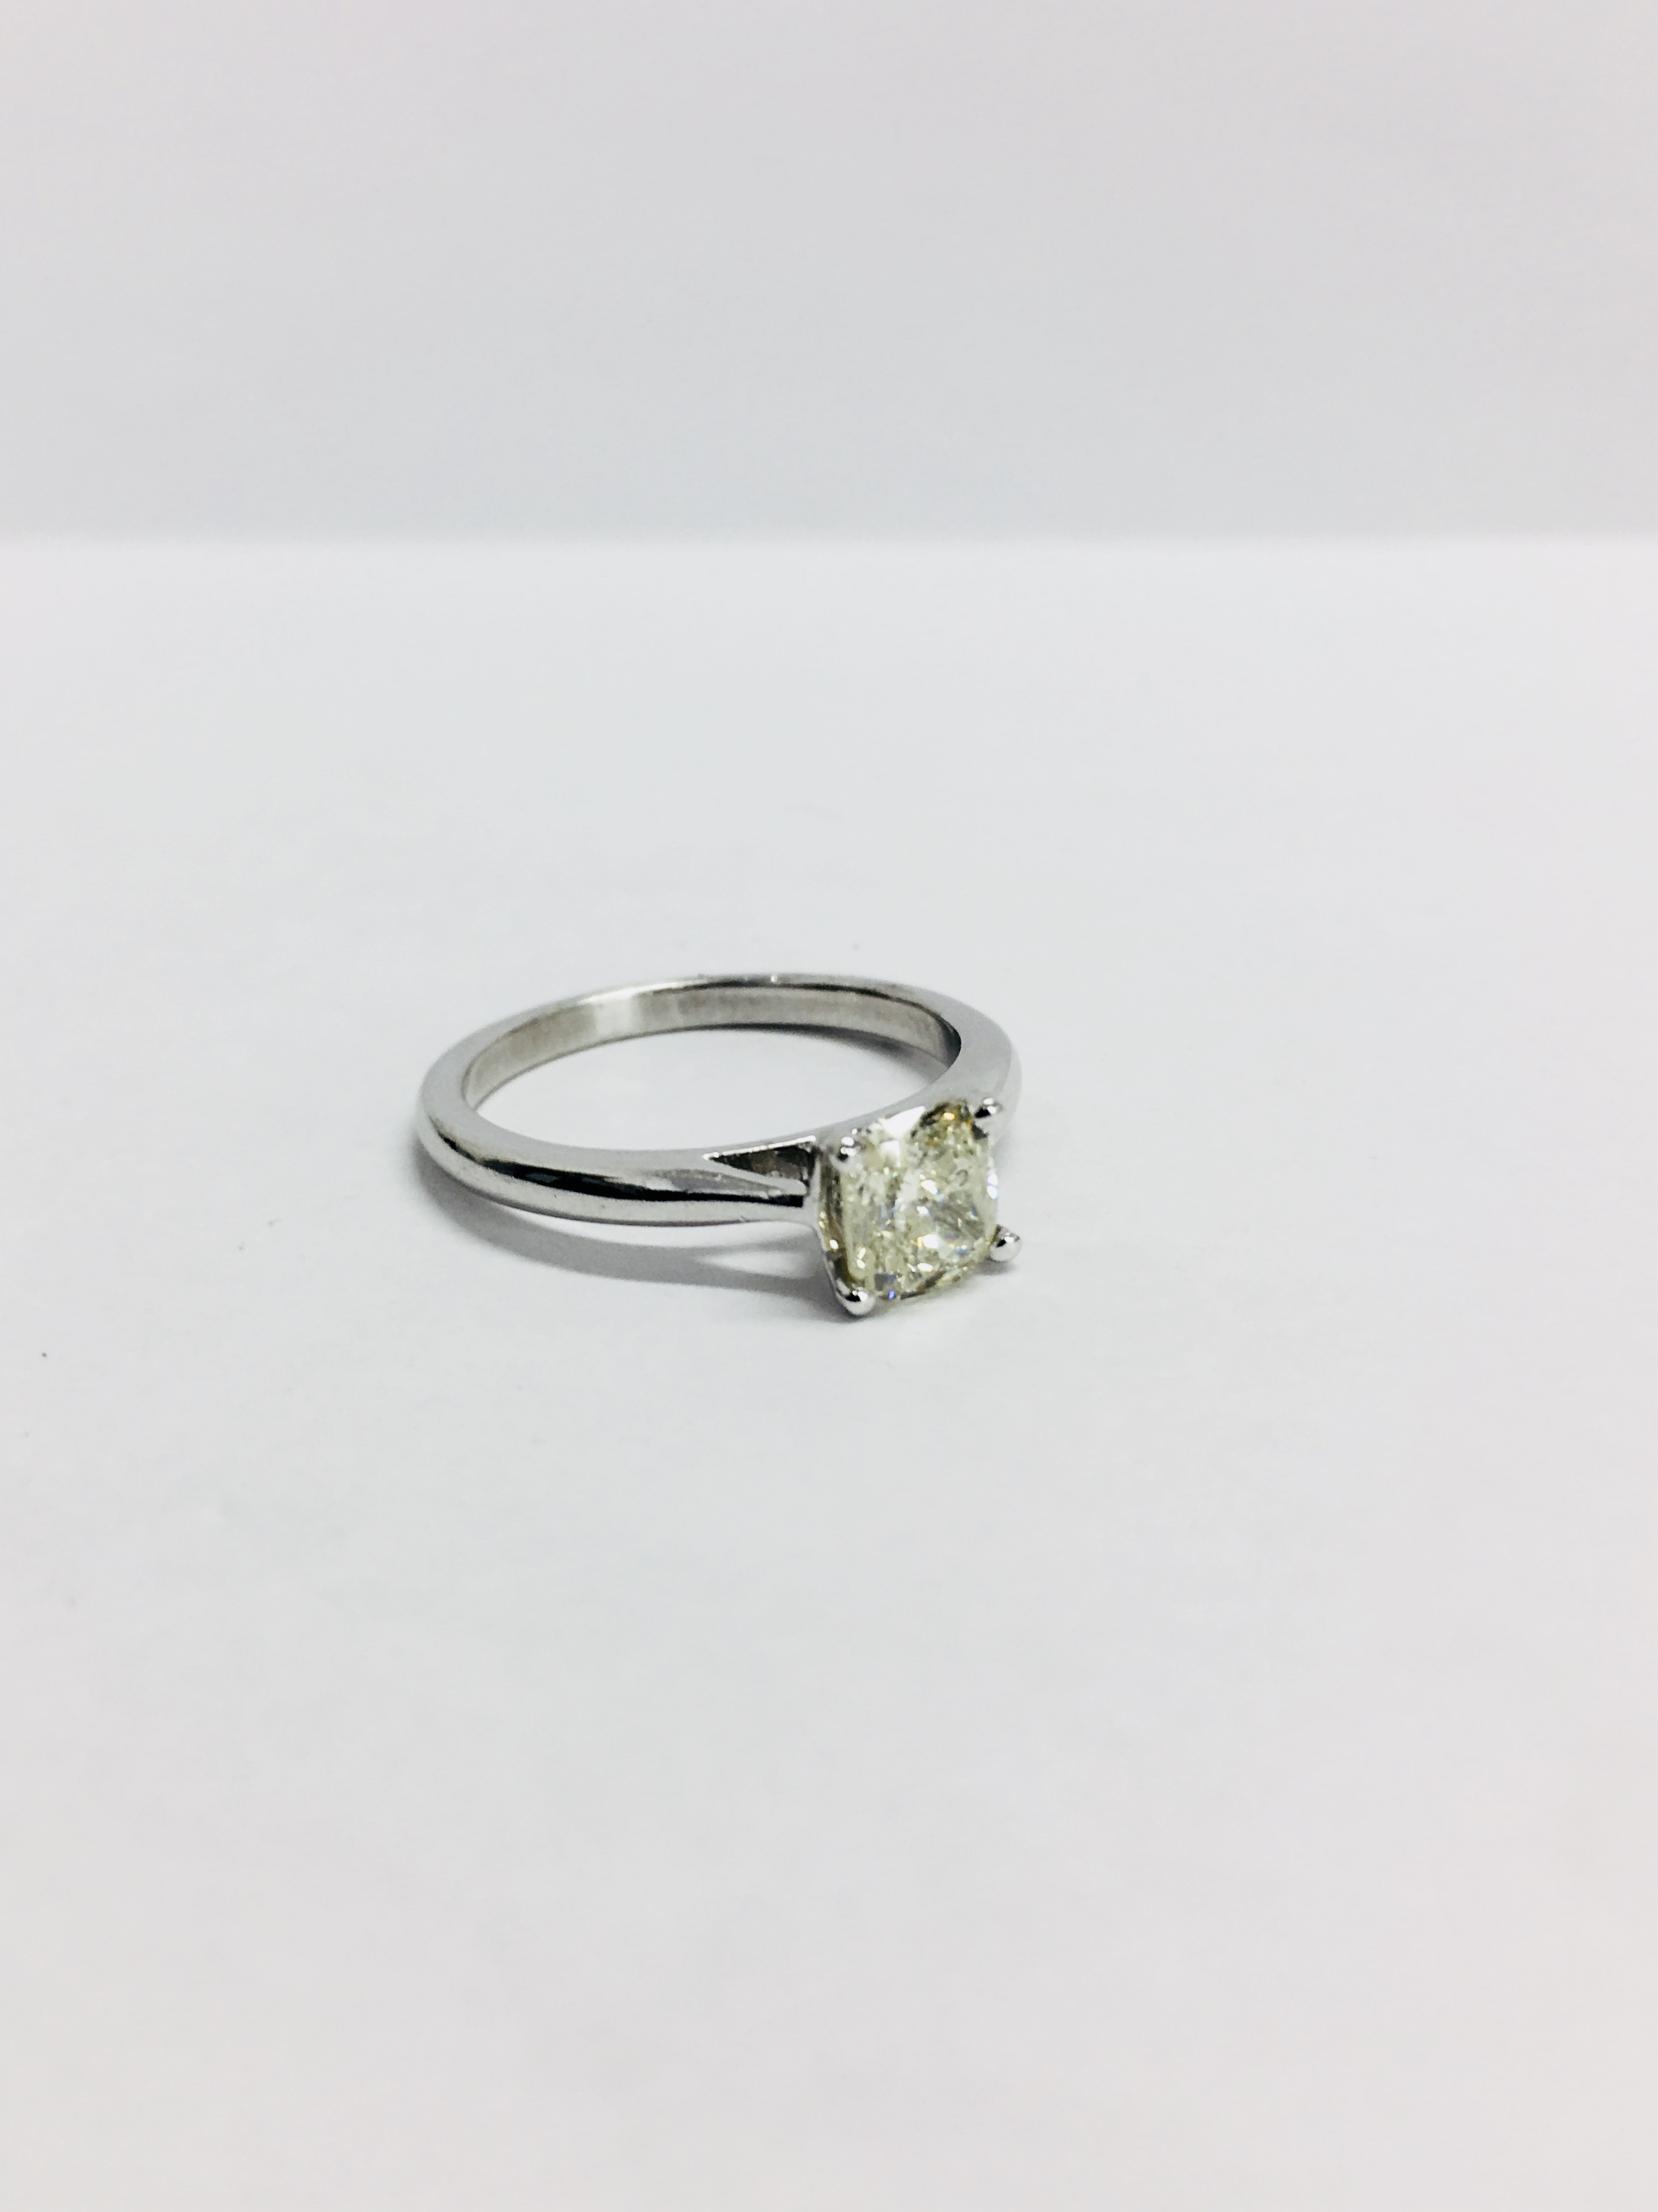 1Ct Fancy Yellow Cushion Cut Diamond Solitaire Ring, - Image 4 of 5